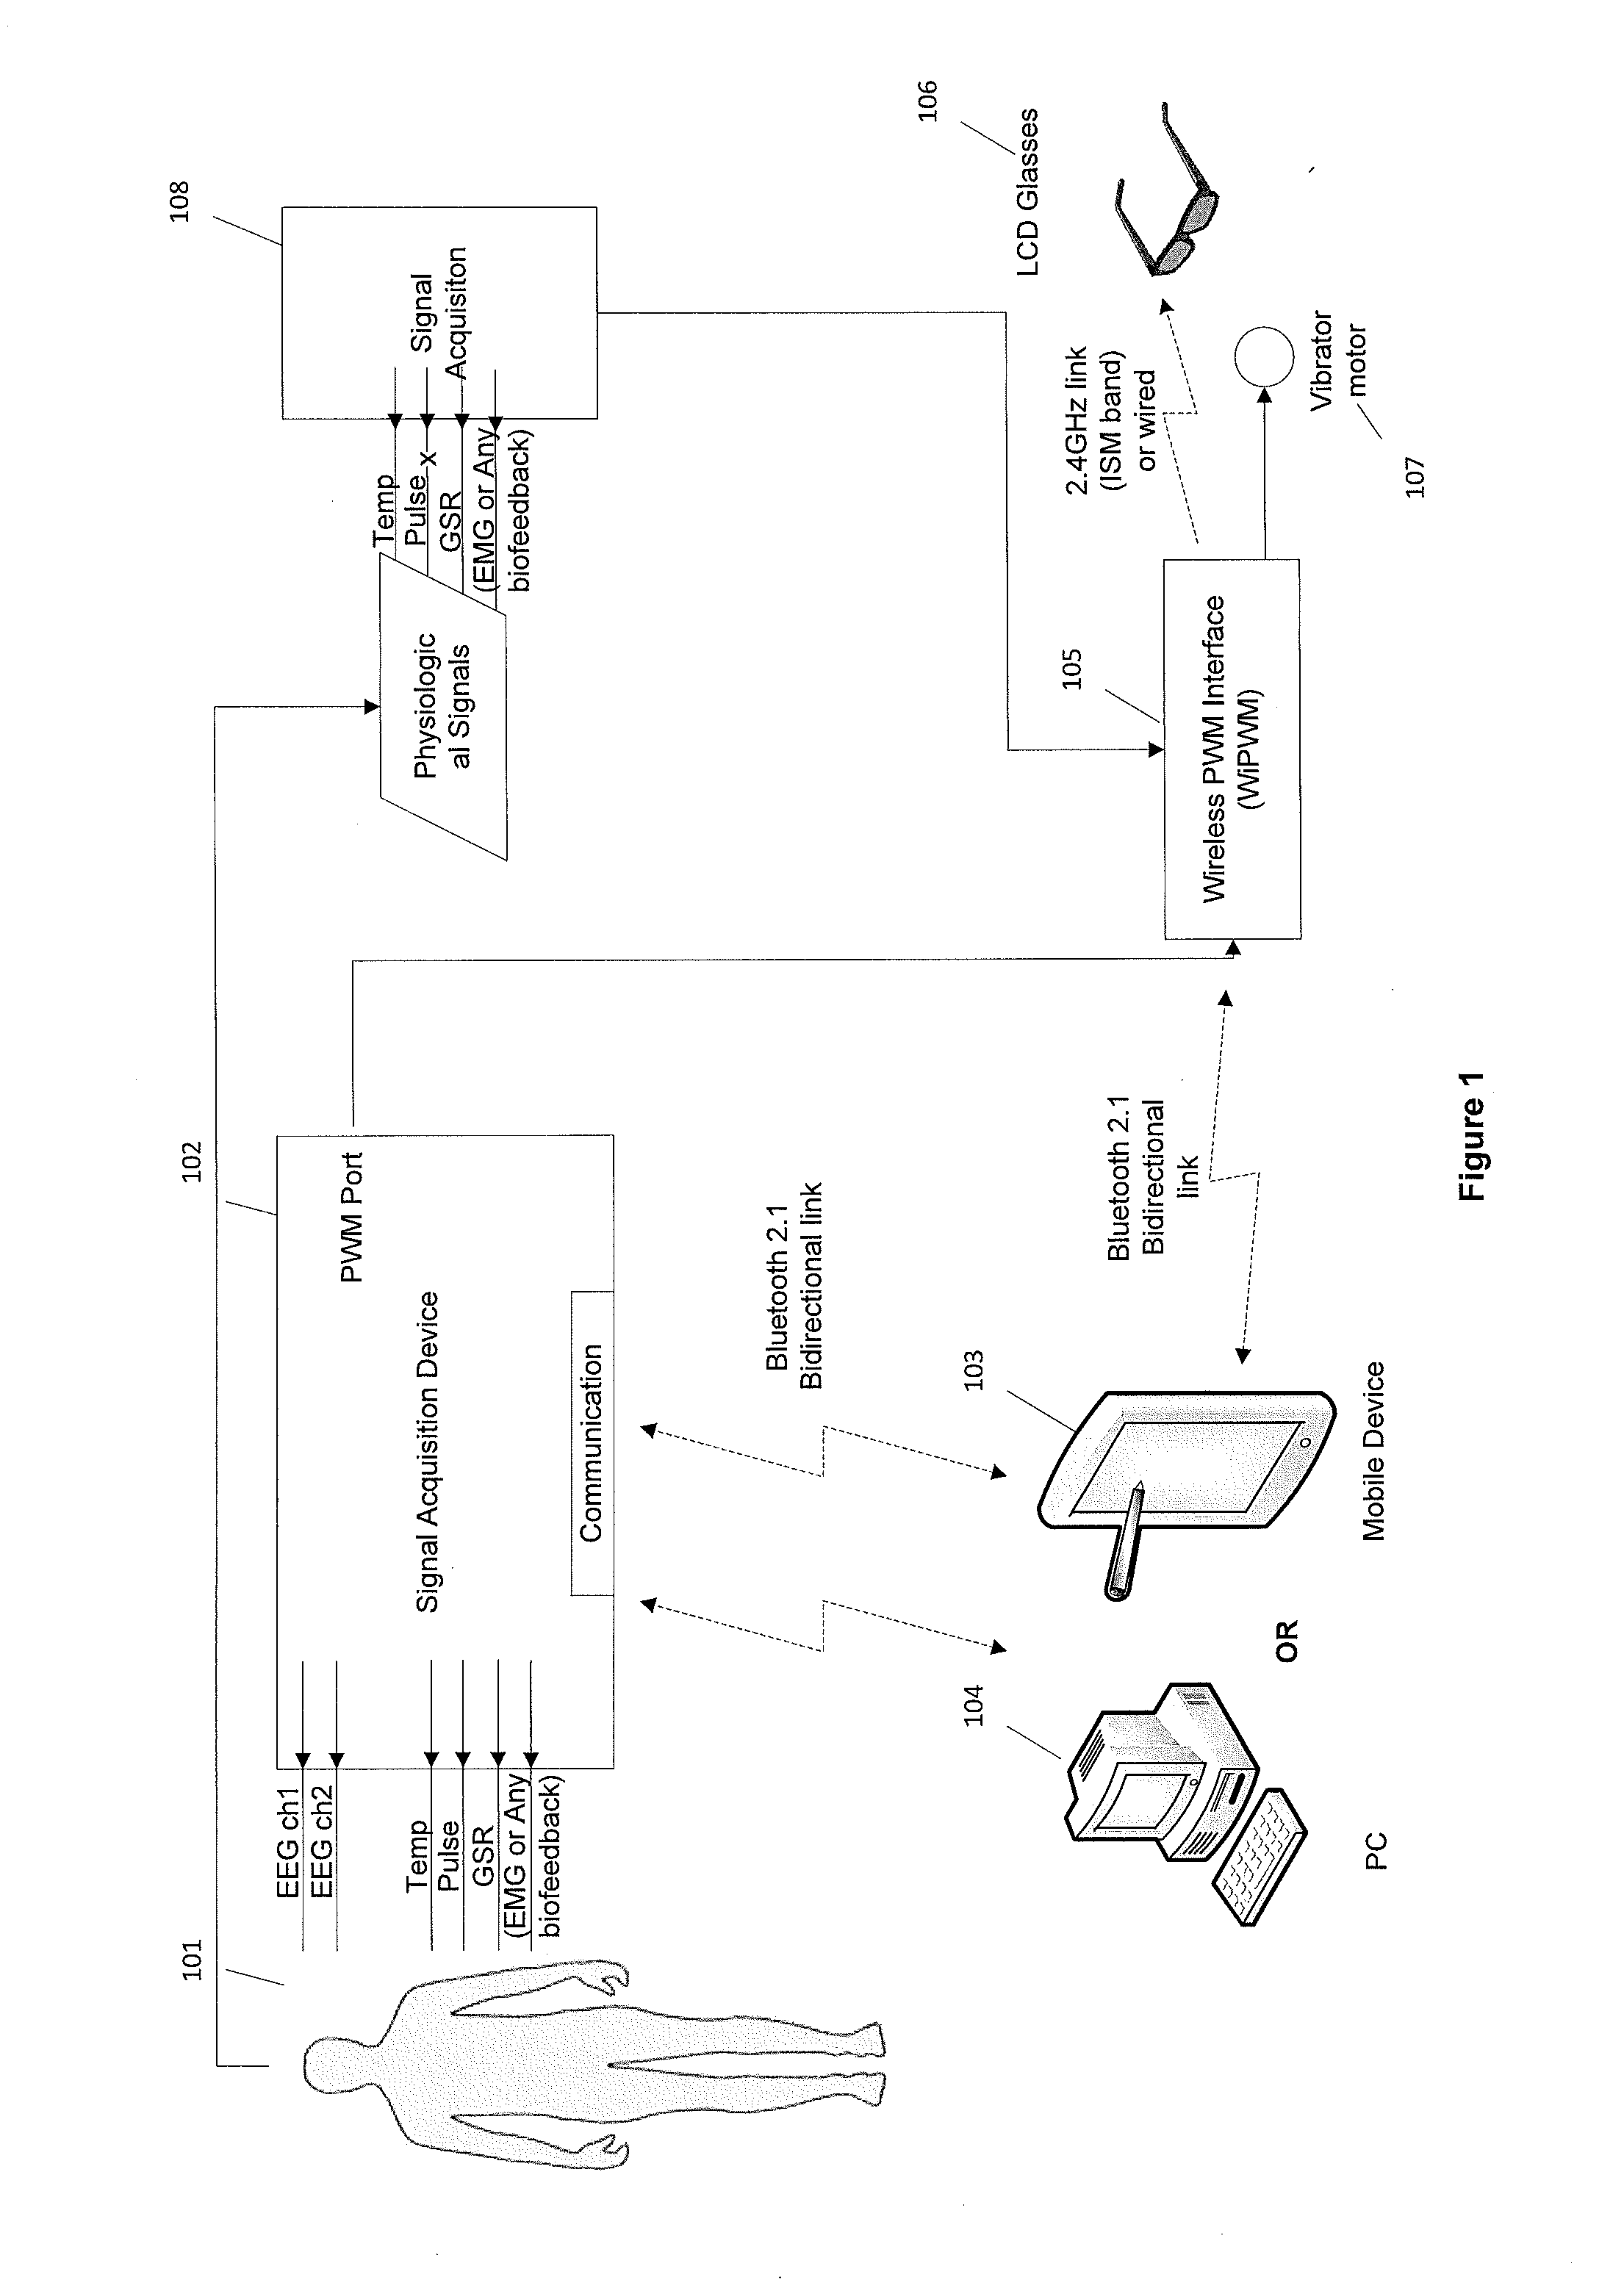 Method and Apparatus for Encouraging Physiological Change Through Physiological Control of Wearable Auditory and Visual Interruption Device